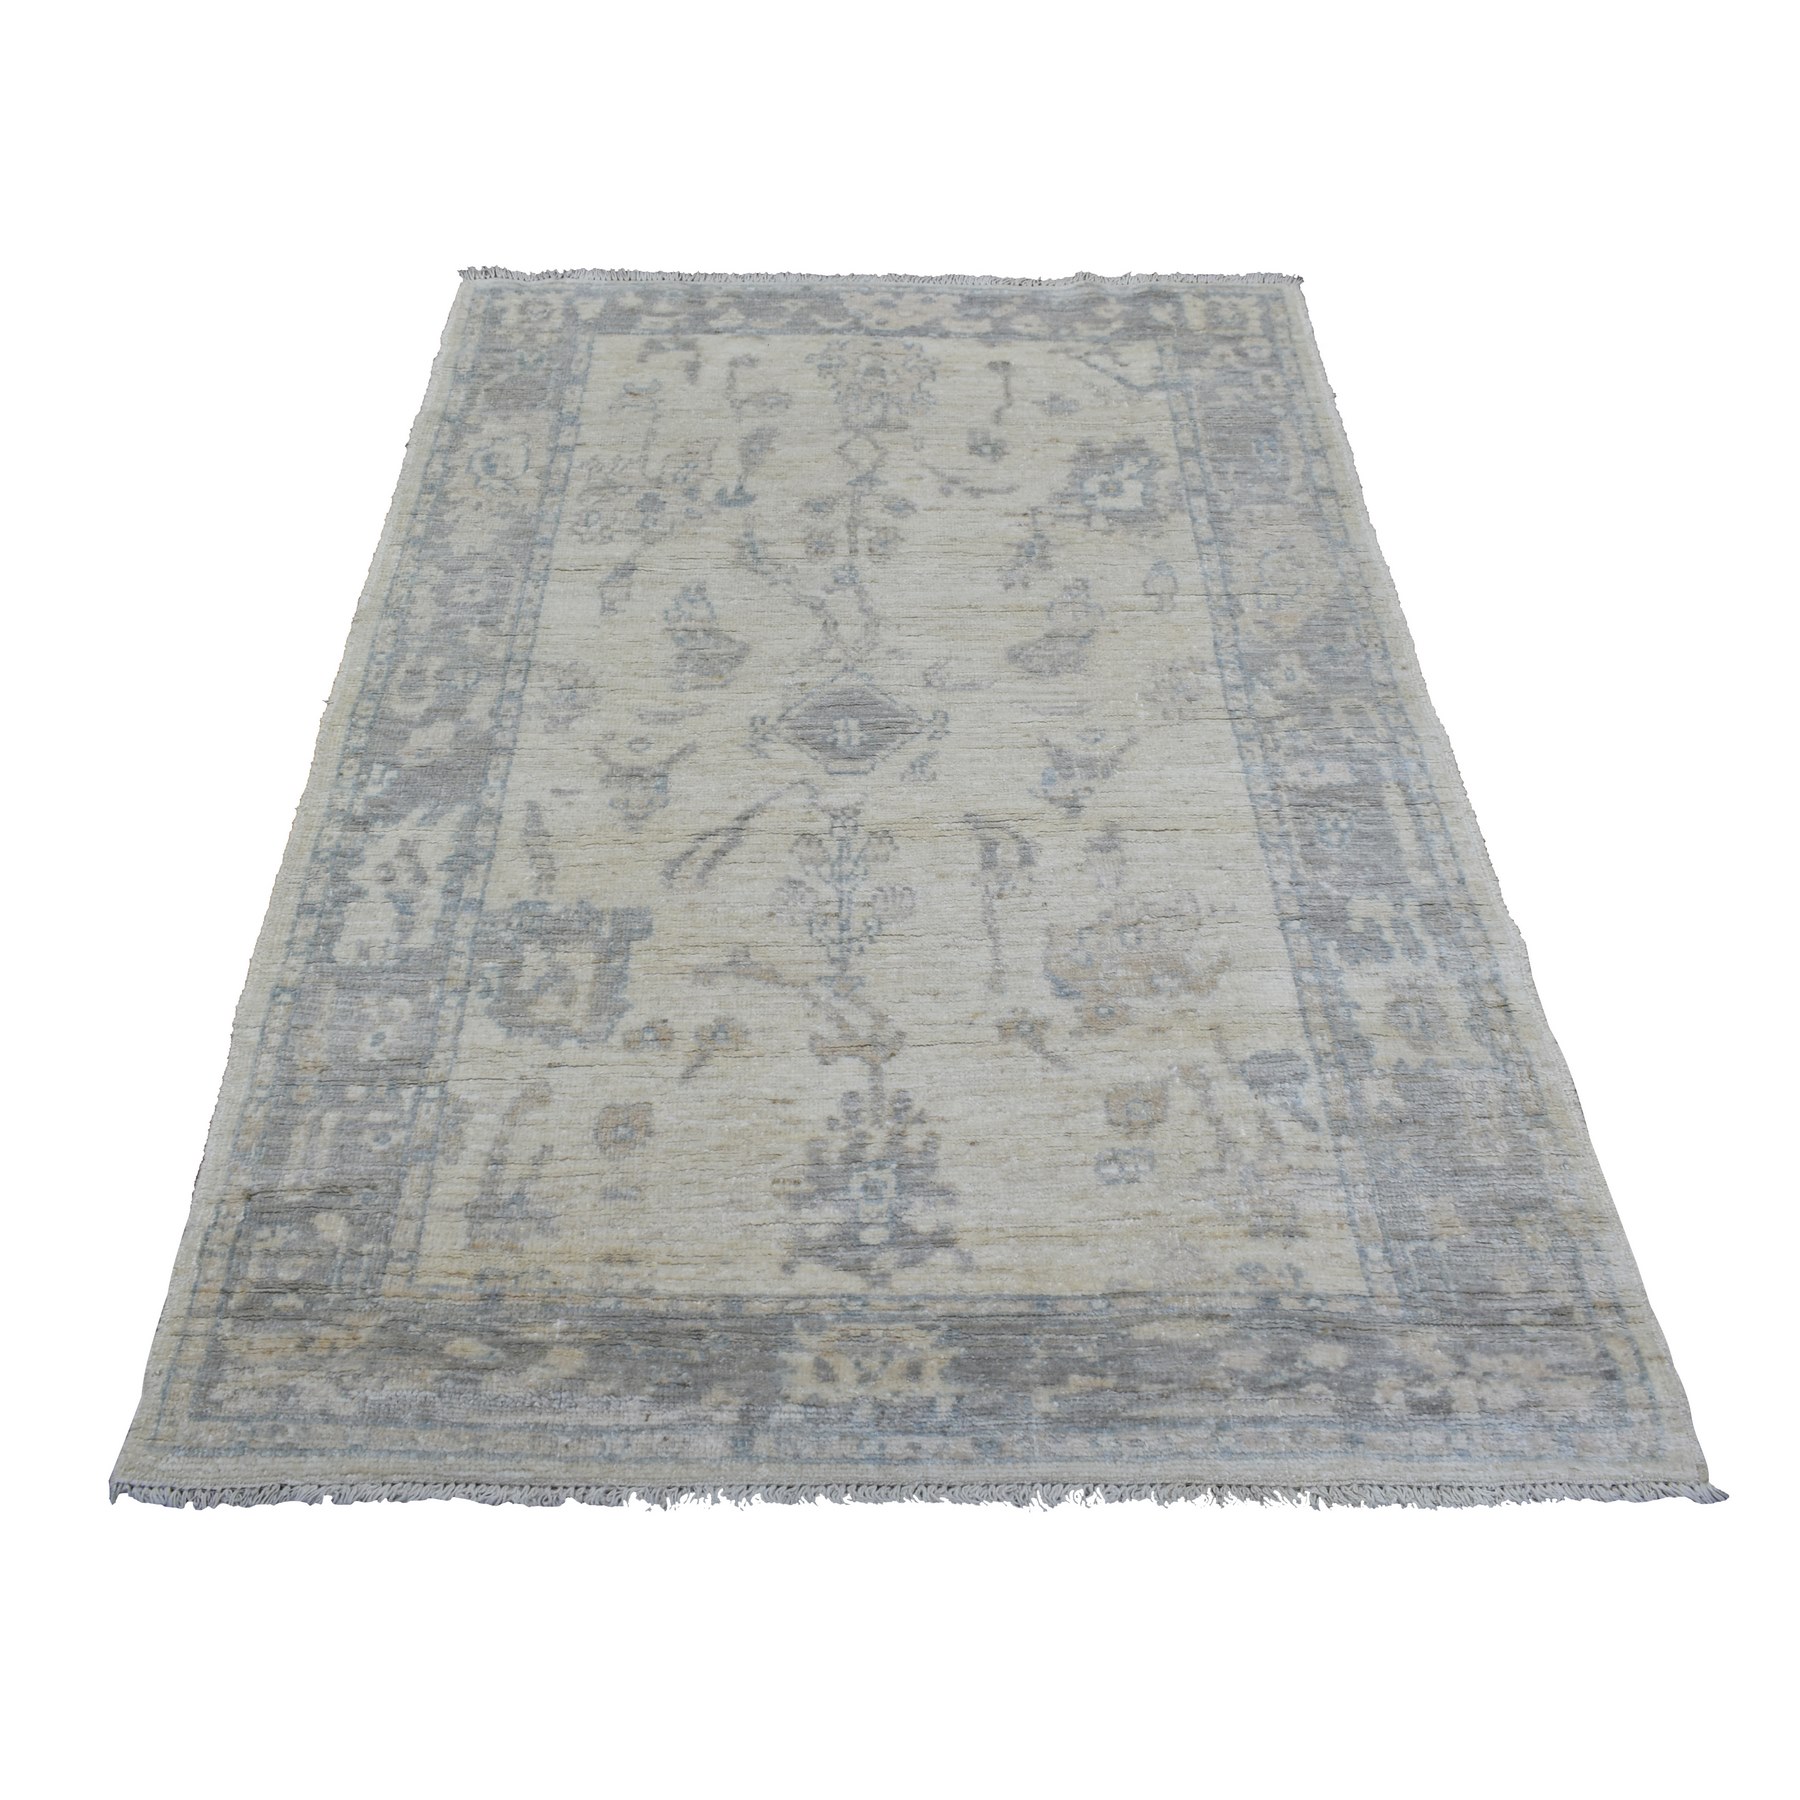 4'x6' Ivory Angora Oushak with All Over Design Hand Woven Soft Afghan Wool Oriental Rug 